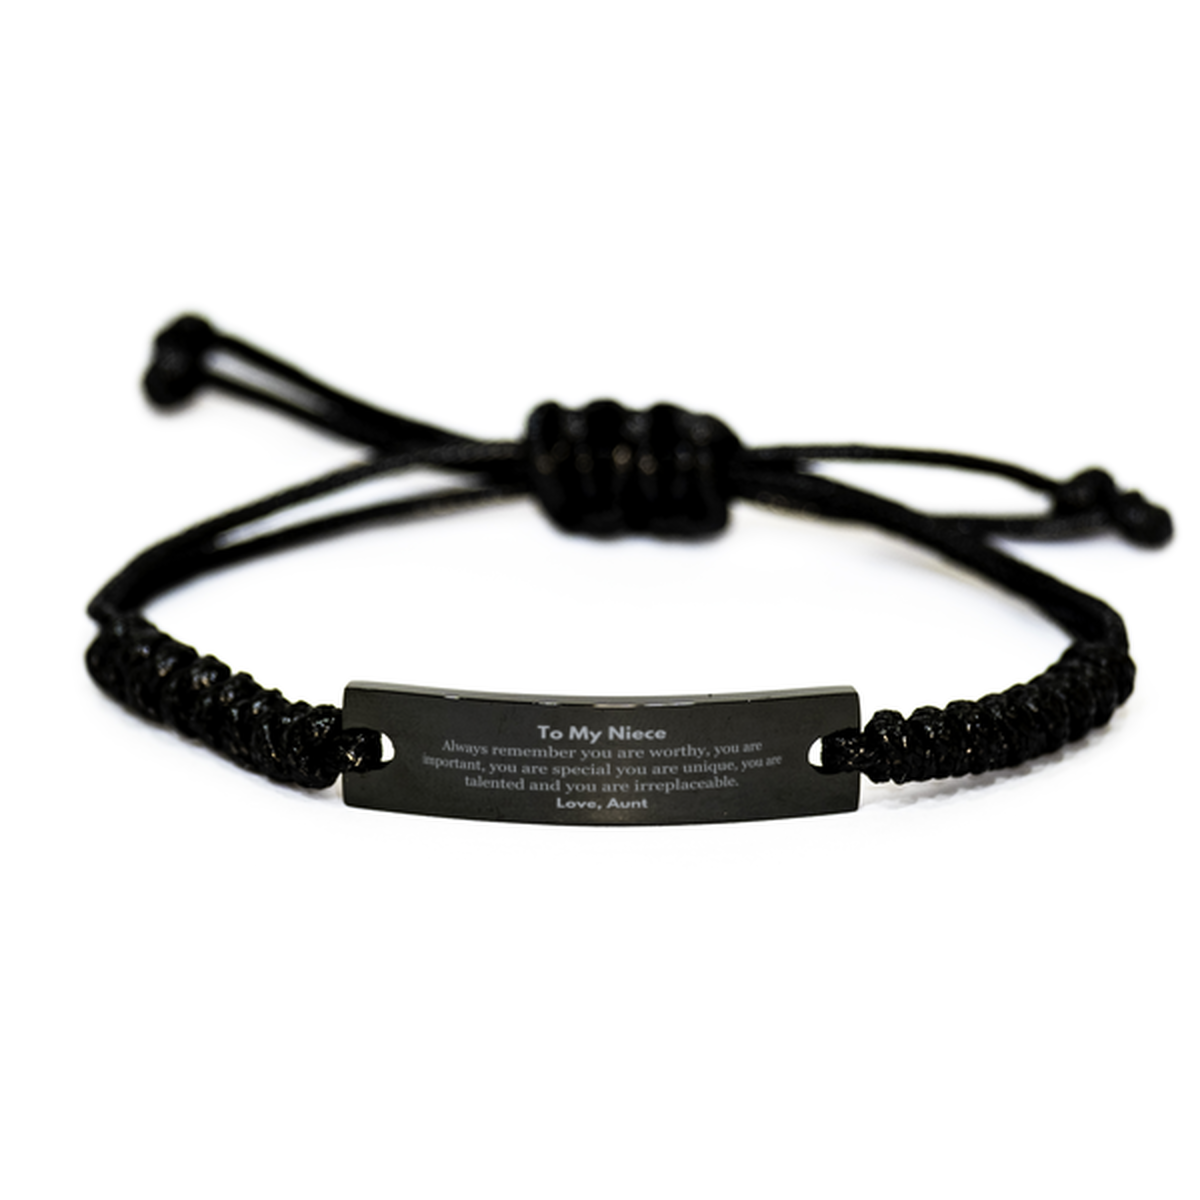 Niece Birthday Gifts from Aunt, Inspirational Black Rope Bracelet for Niece Christmas Graduation Gifts for Niece Always remember you are worthy, you are important. Love, Aunt